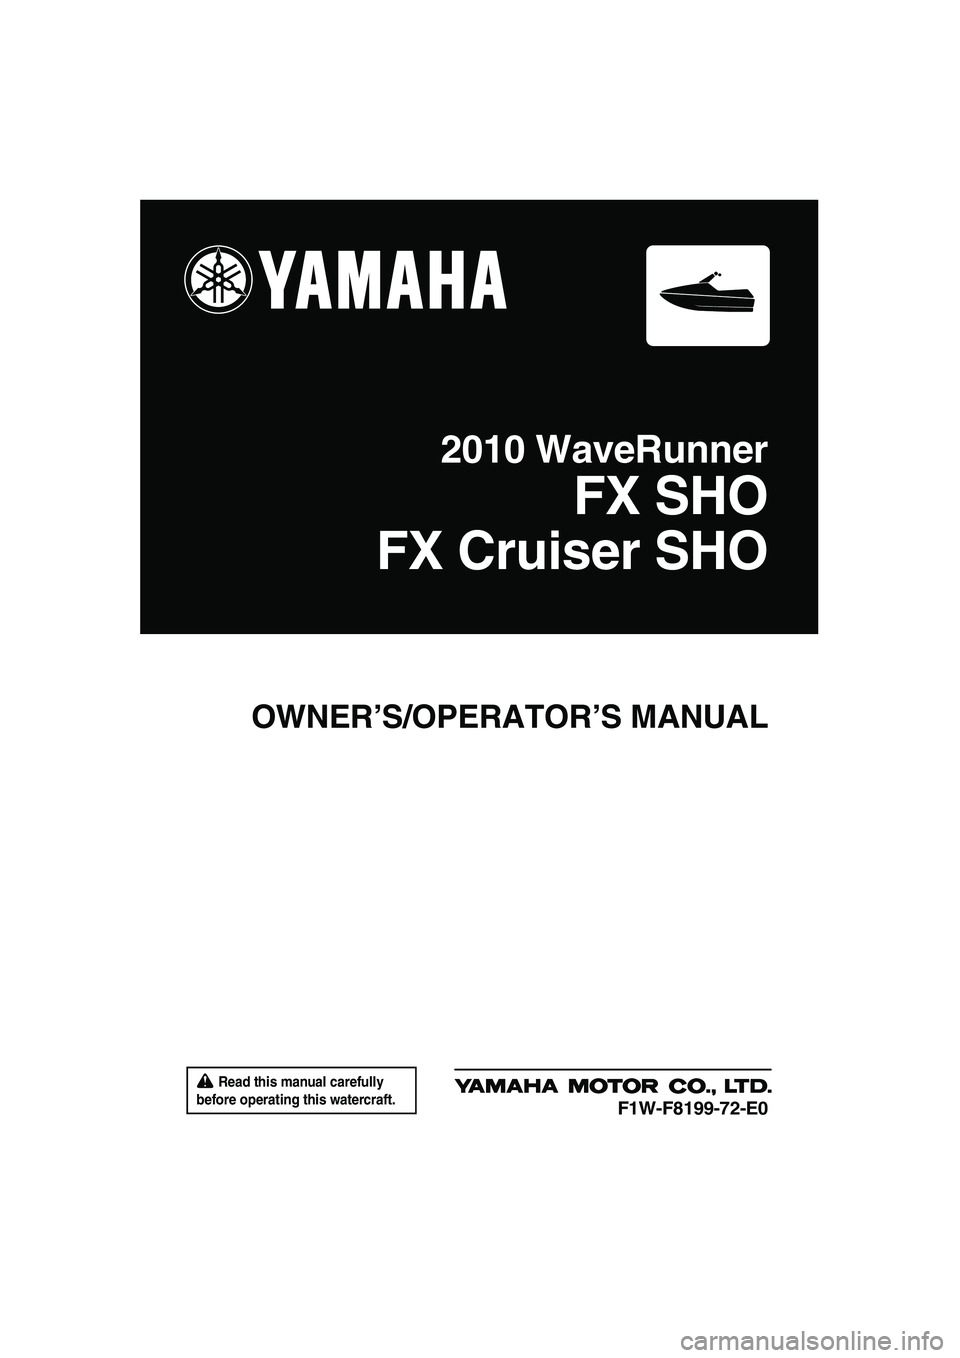 YAMAHA SVHO CRUISER 2010  Owners Manual  Read this manual carefully 
before operating this watercraft.
OWNER’S/OPERATOR’S MANUAL
2010 WaveRunner
FX SHO
FX Cruiser SHO
F1W-F8199-72-E0
UF1W72E0.book  Page 1  Monday, June 1, 2009  1:42 PM 